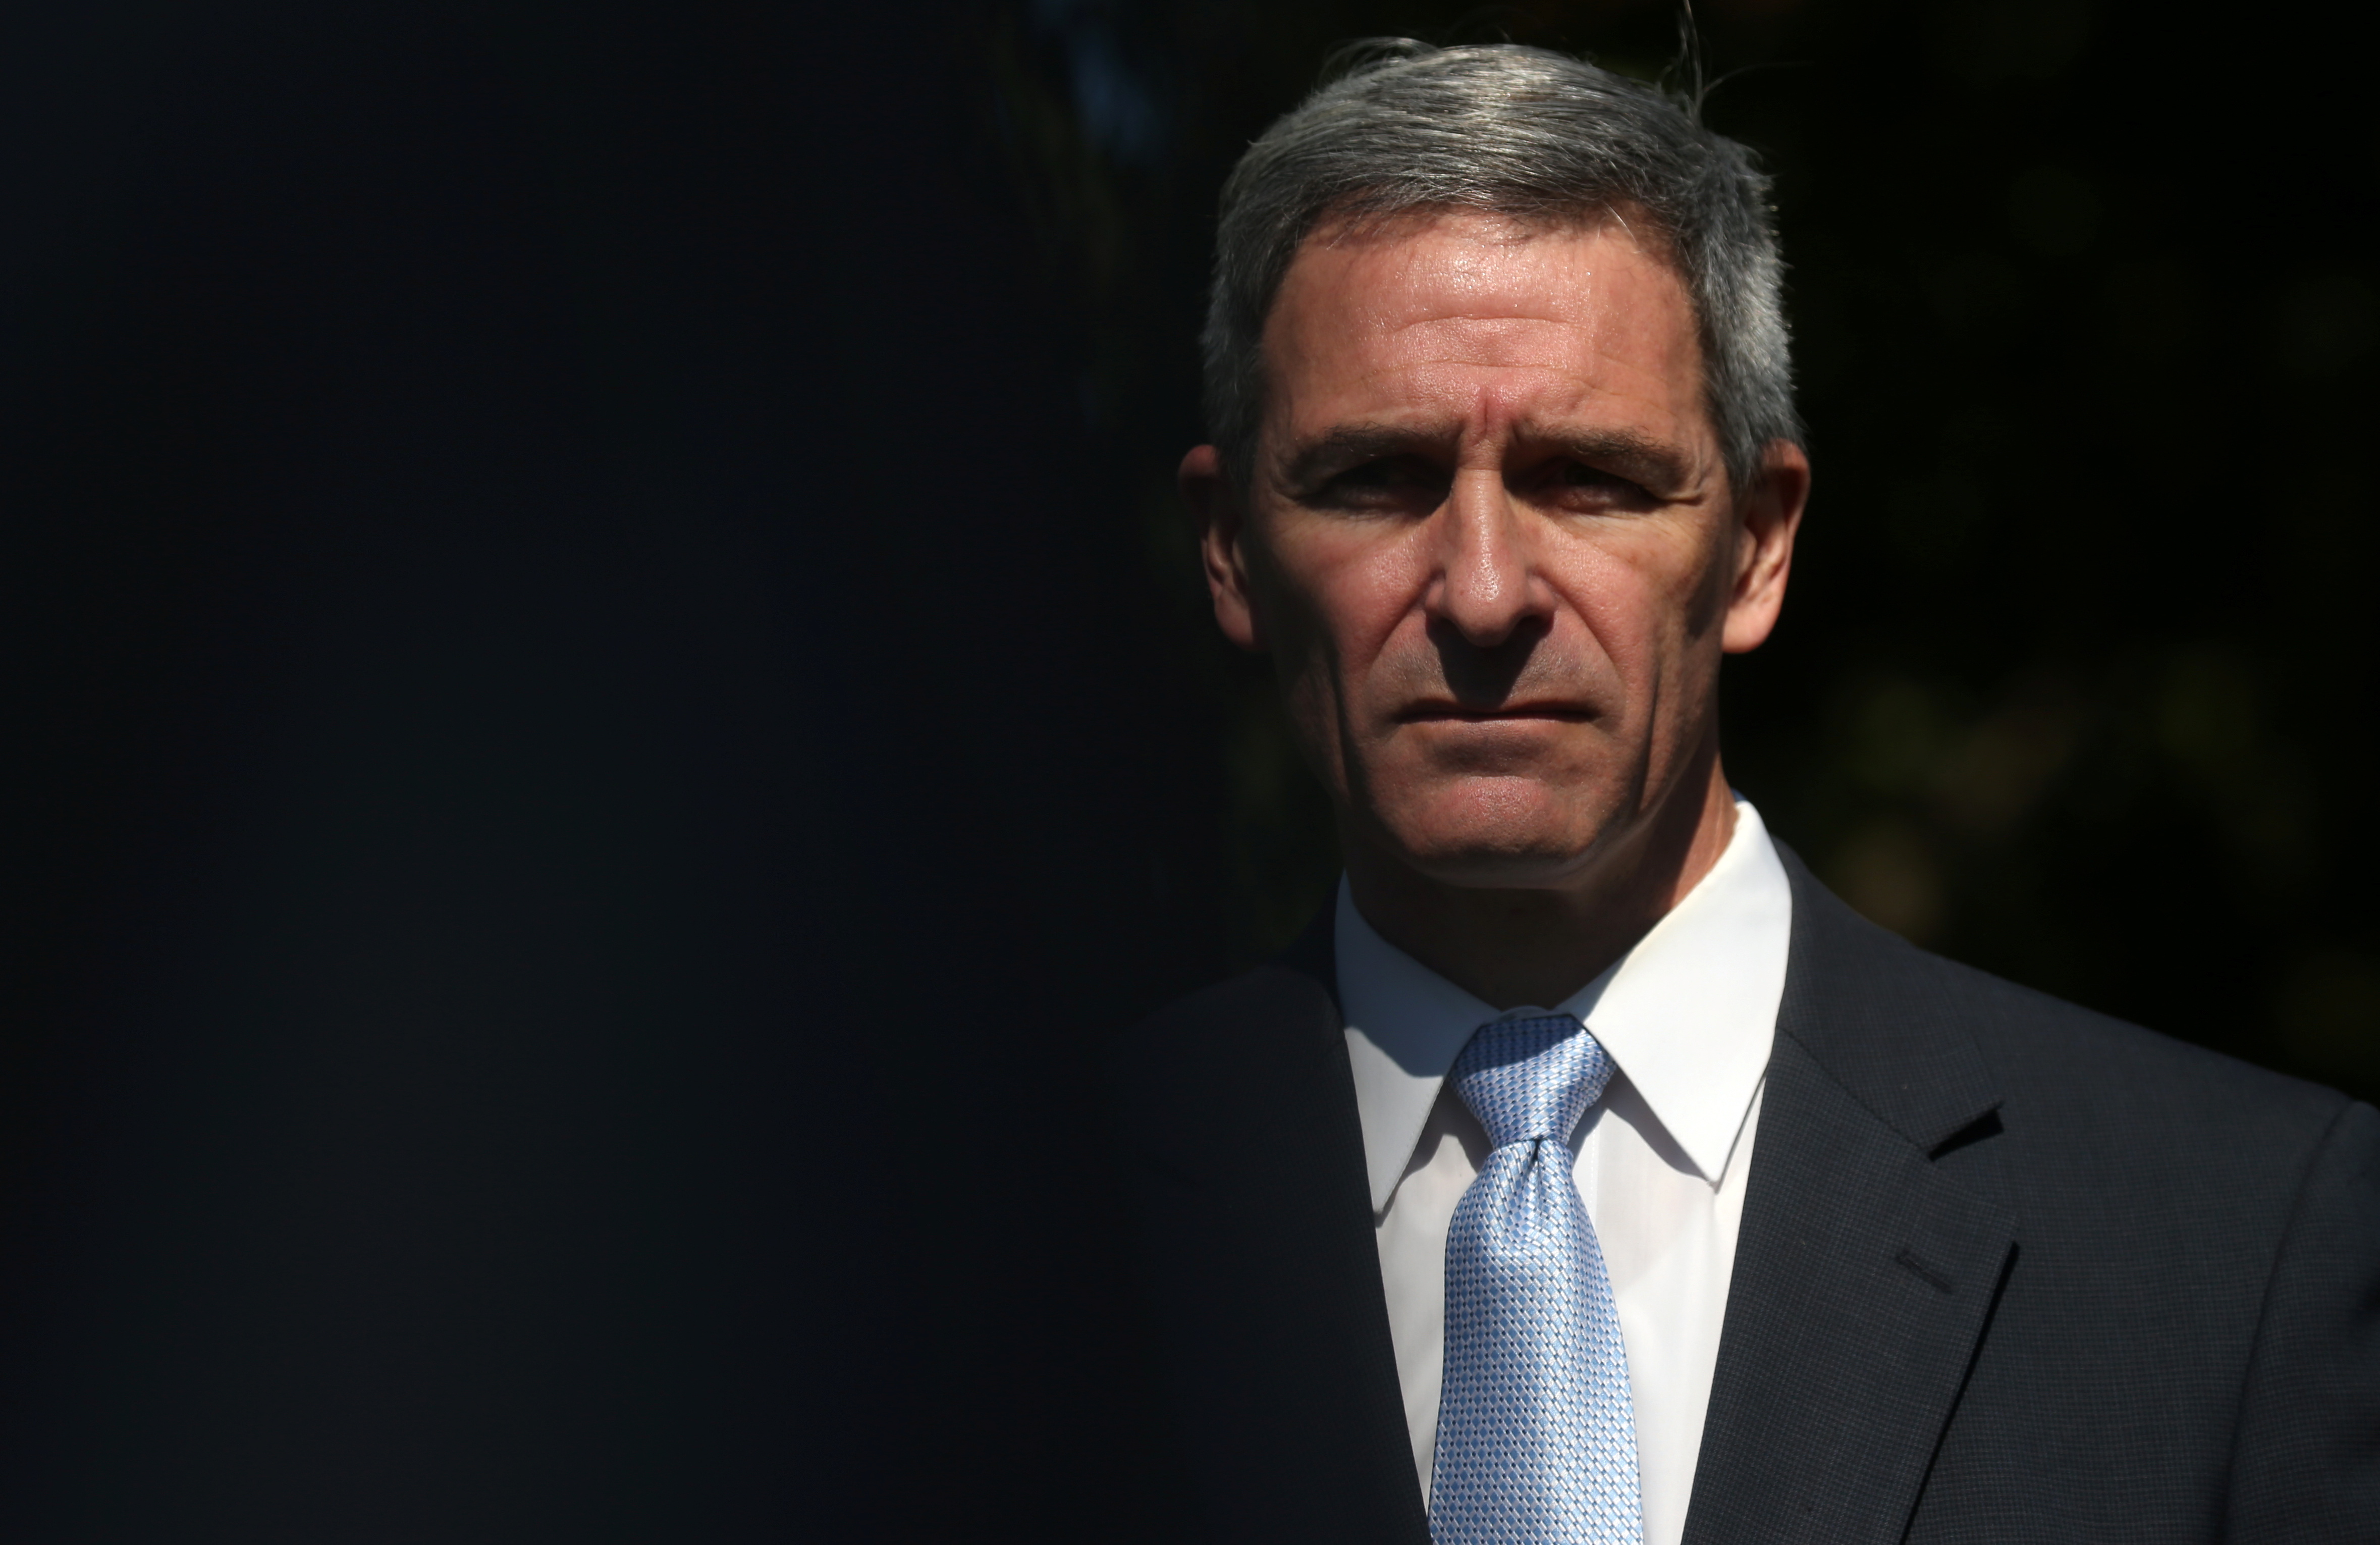 Ken Cuccinelli, acting director of U.S. Citizenship and Immigration Services, speaks to the news media